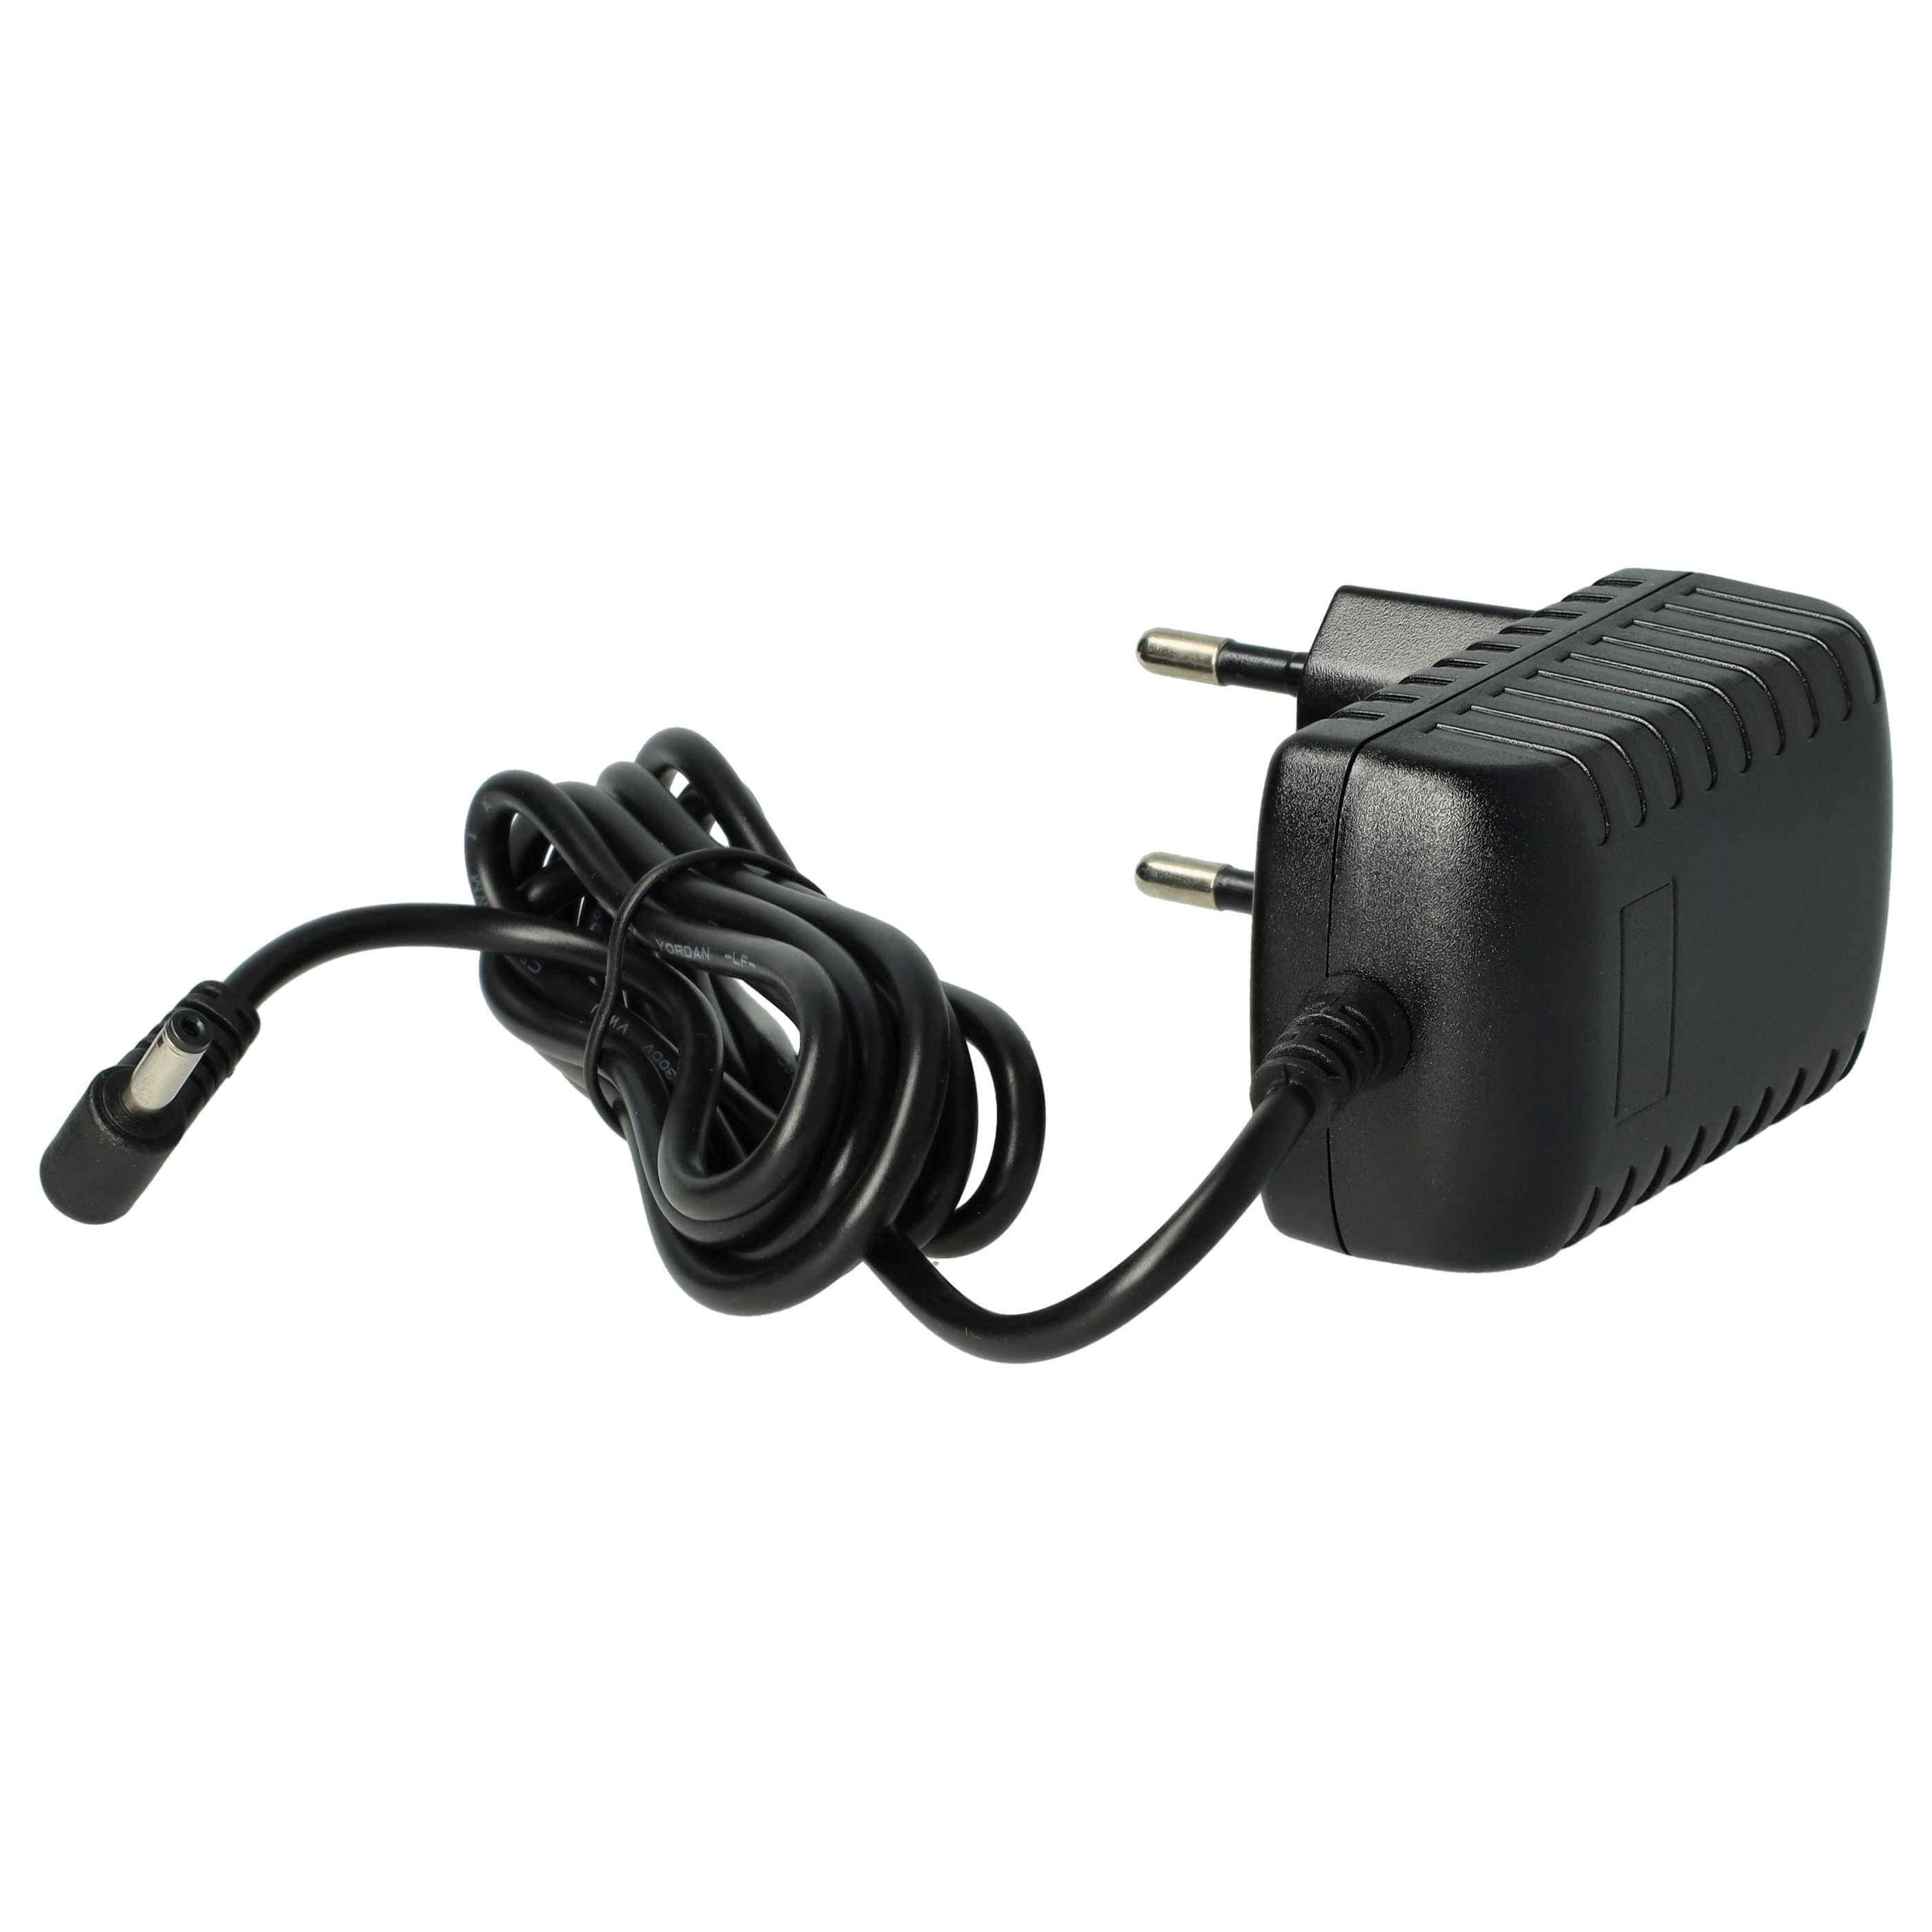 Mains Power Adapter suitable for EXP2546 Philips CD Player etc. - DC 5 V / 1 A